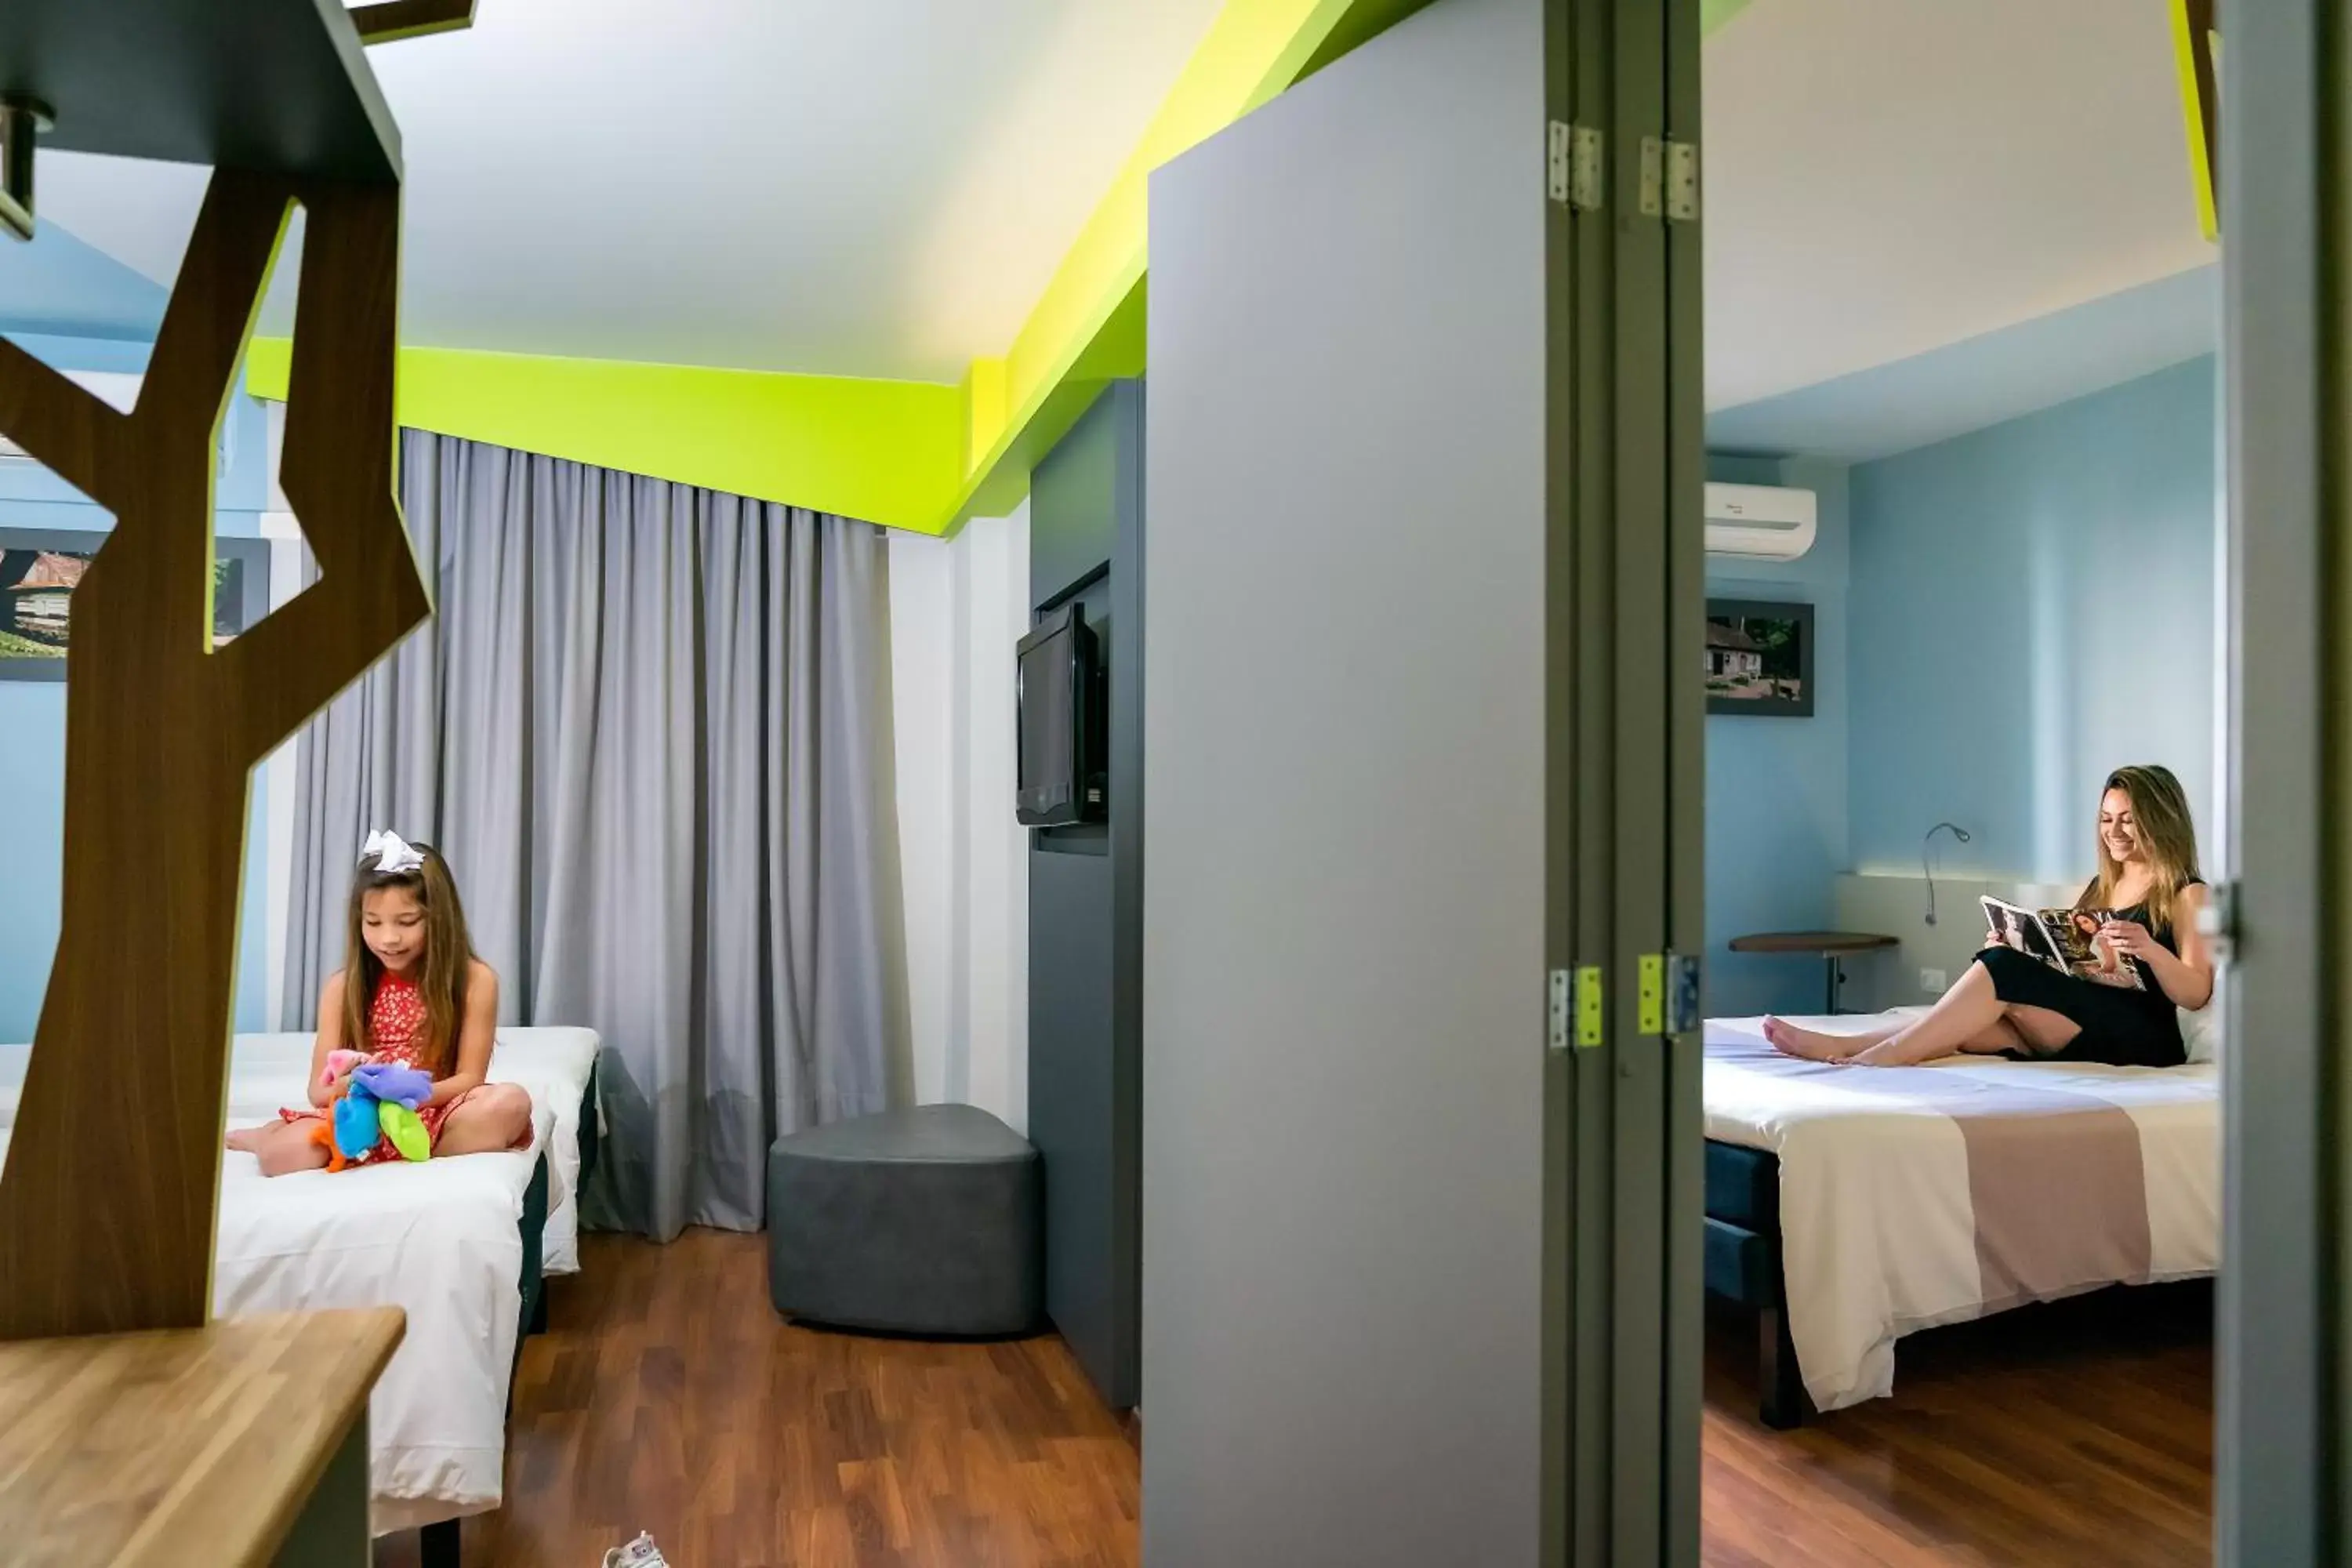 People, Guests in ibis Styles Curitiba Centro Civico